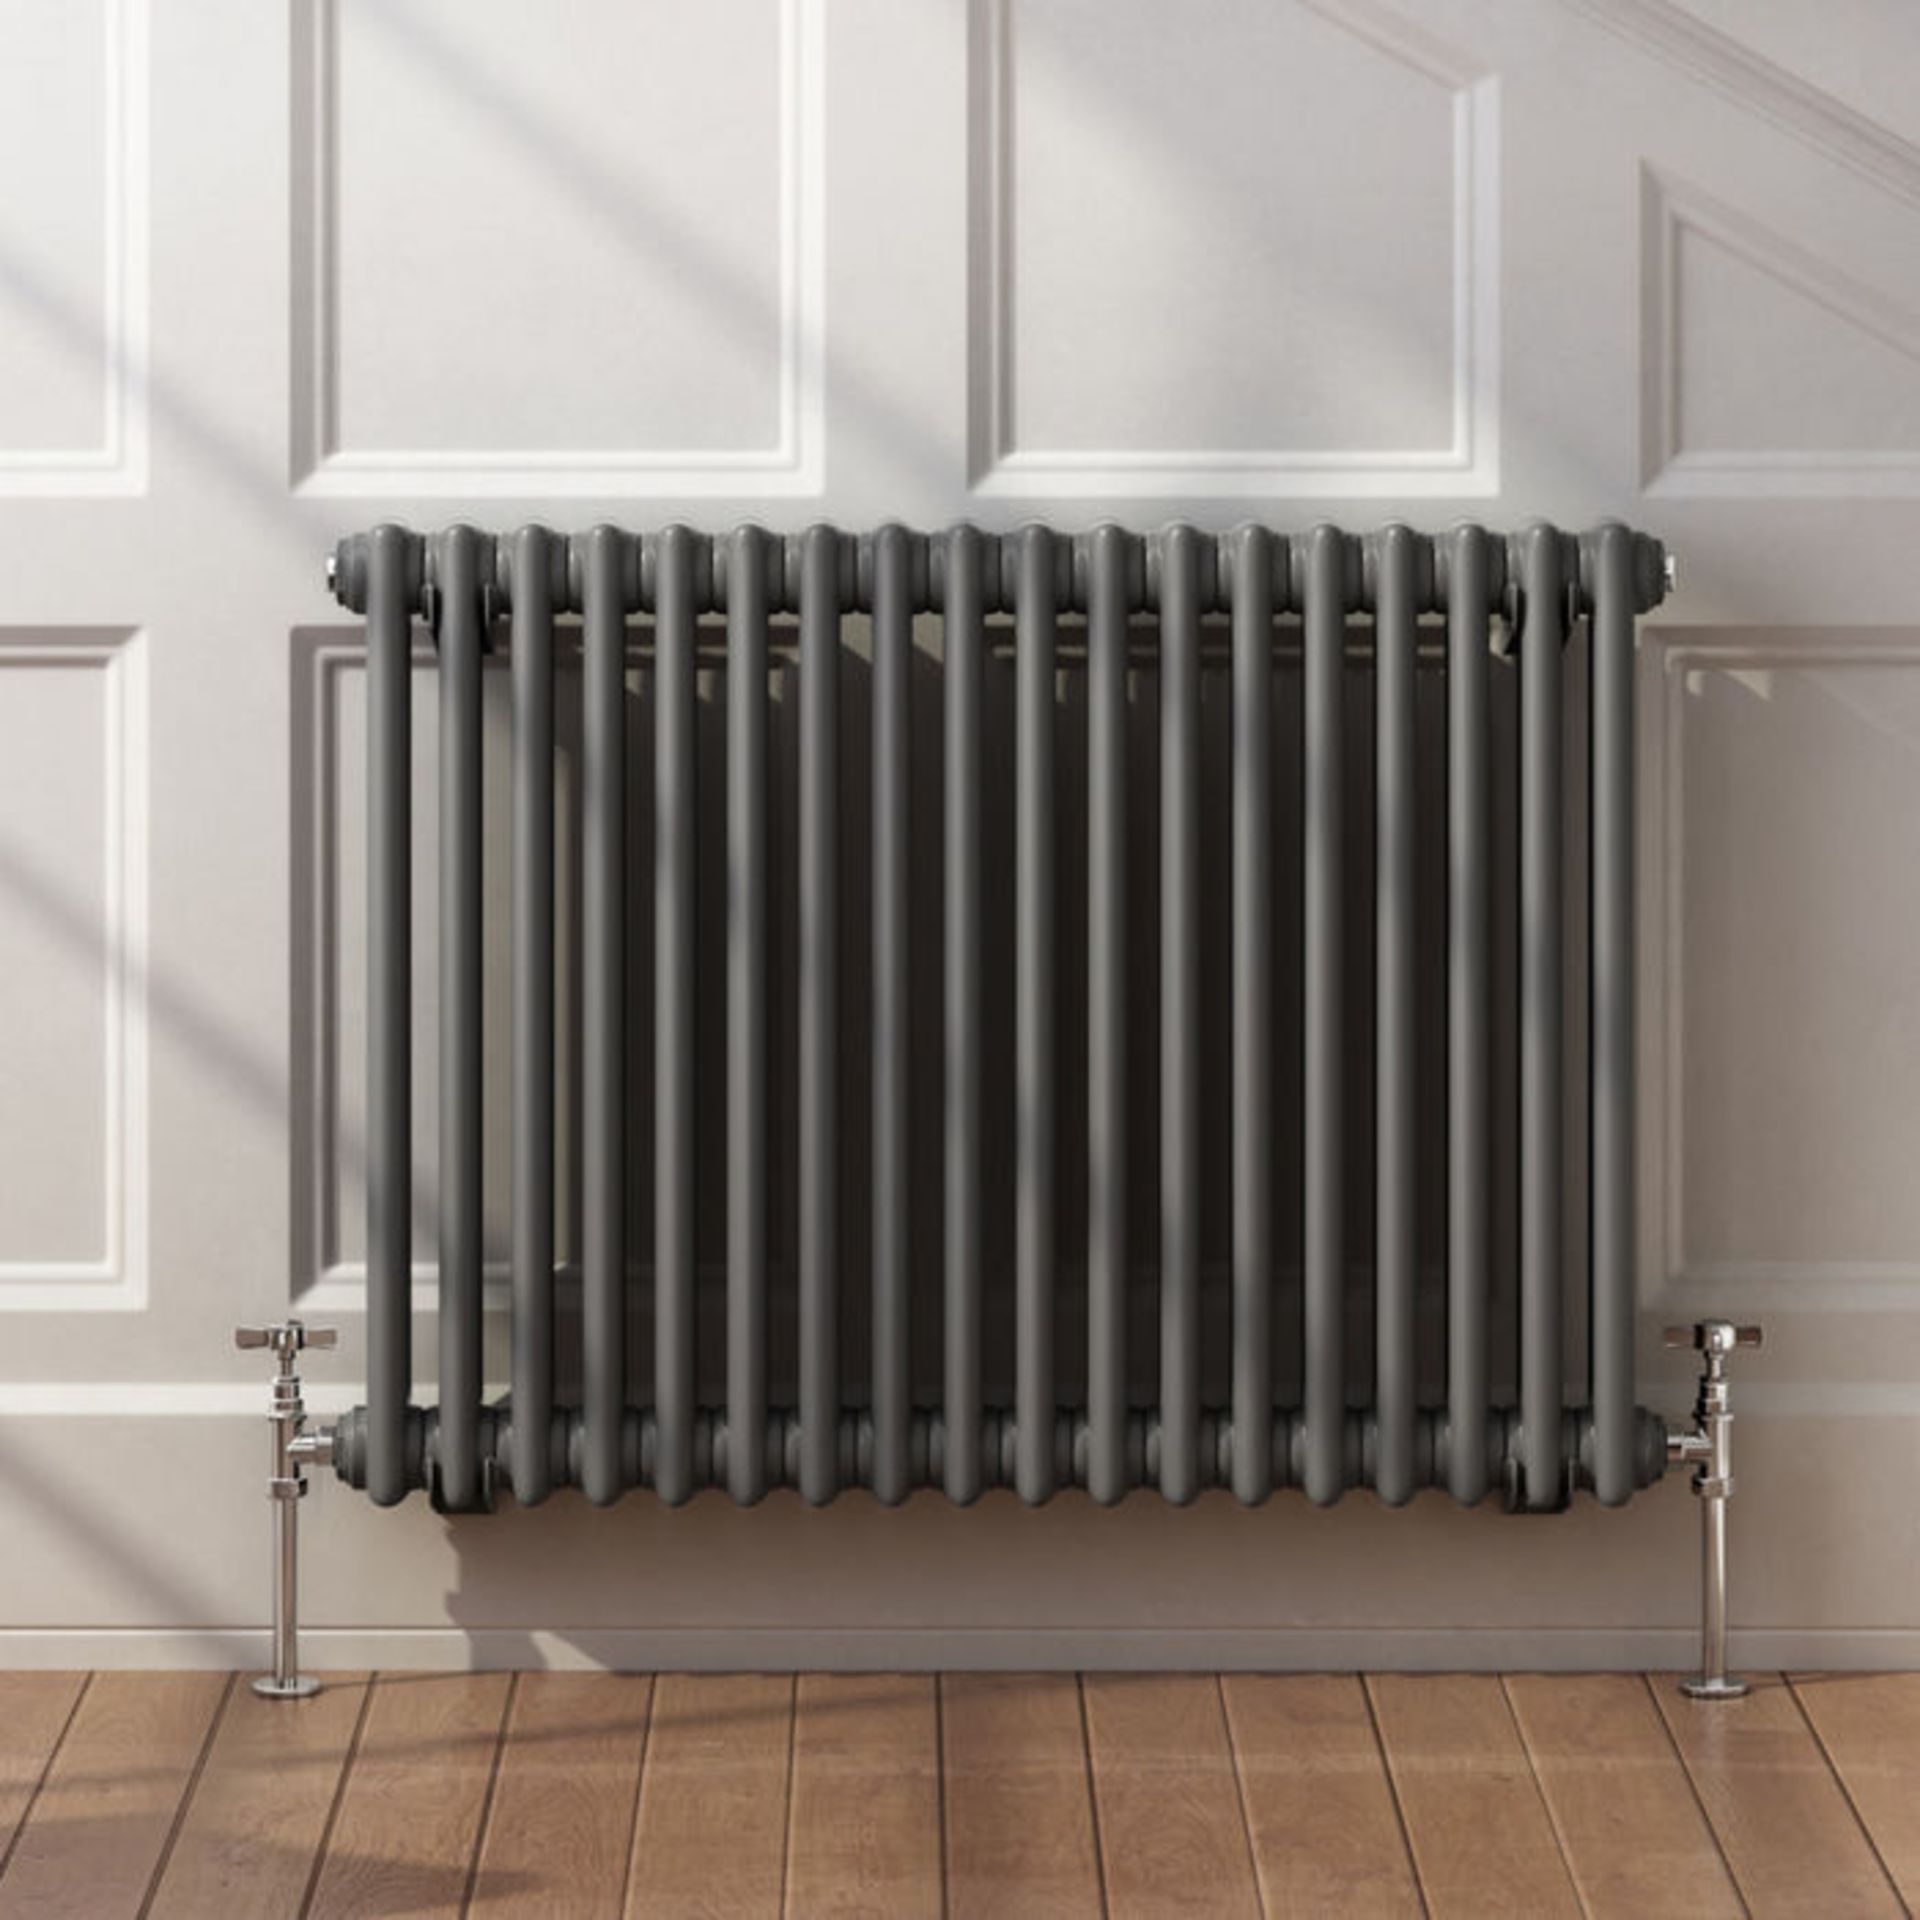 (L36) 600x828mm Anthracite Double Panel Horizontal Colosseum Traditional Radiator. RRP £447.99. - Image 3 of 3